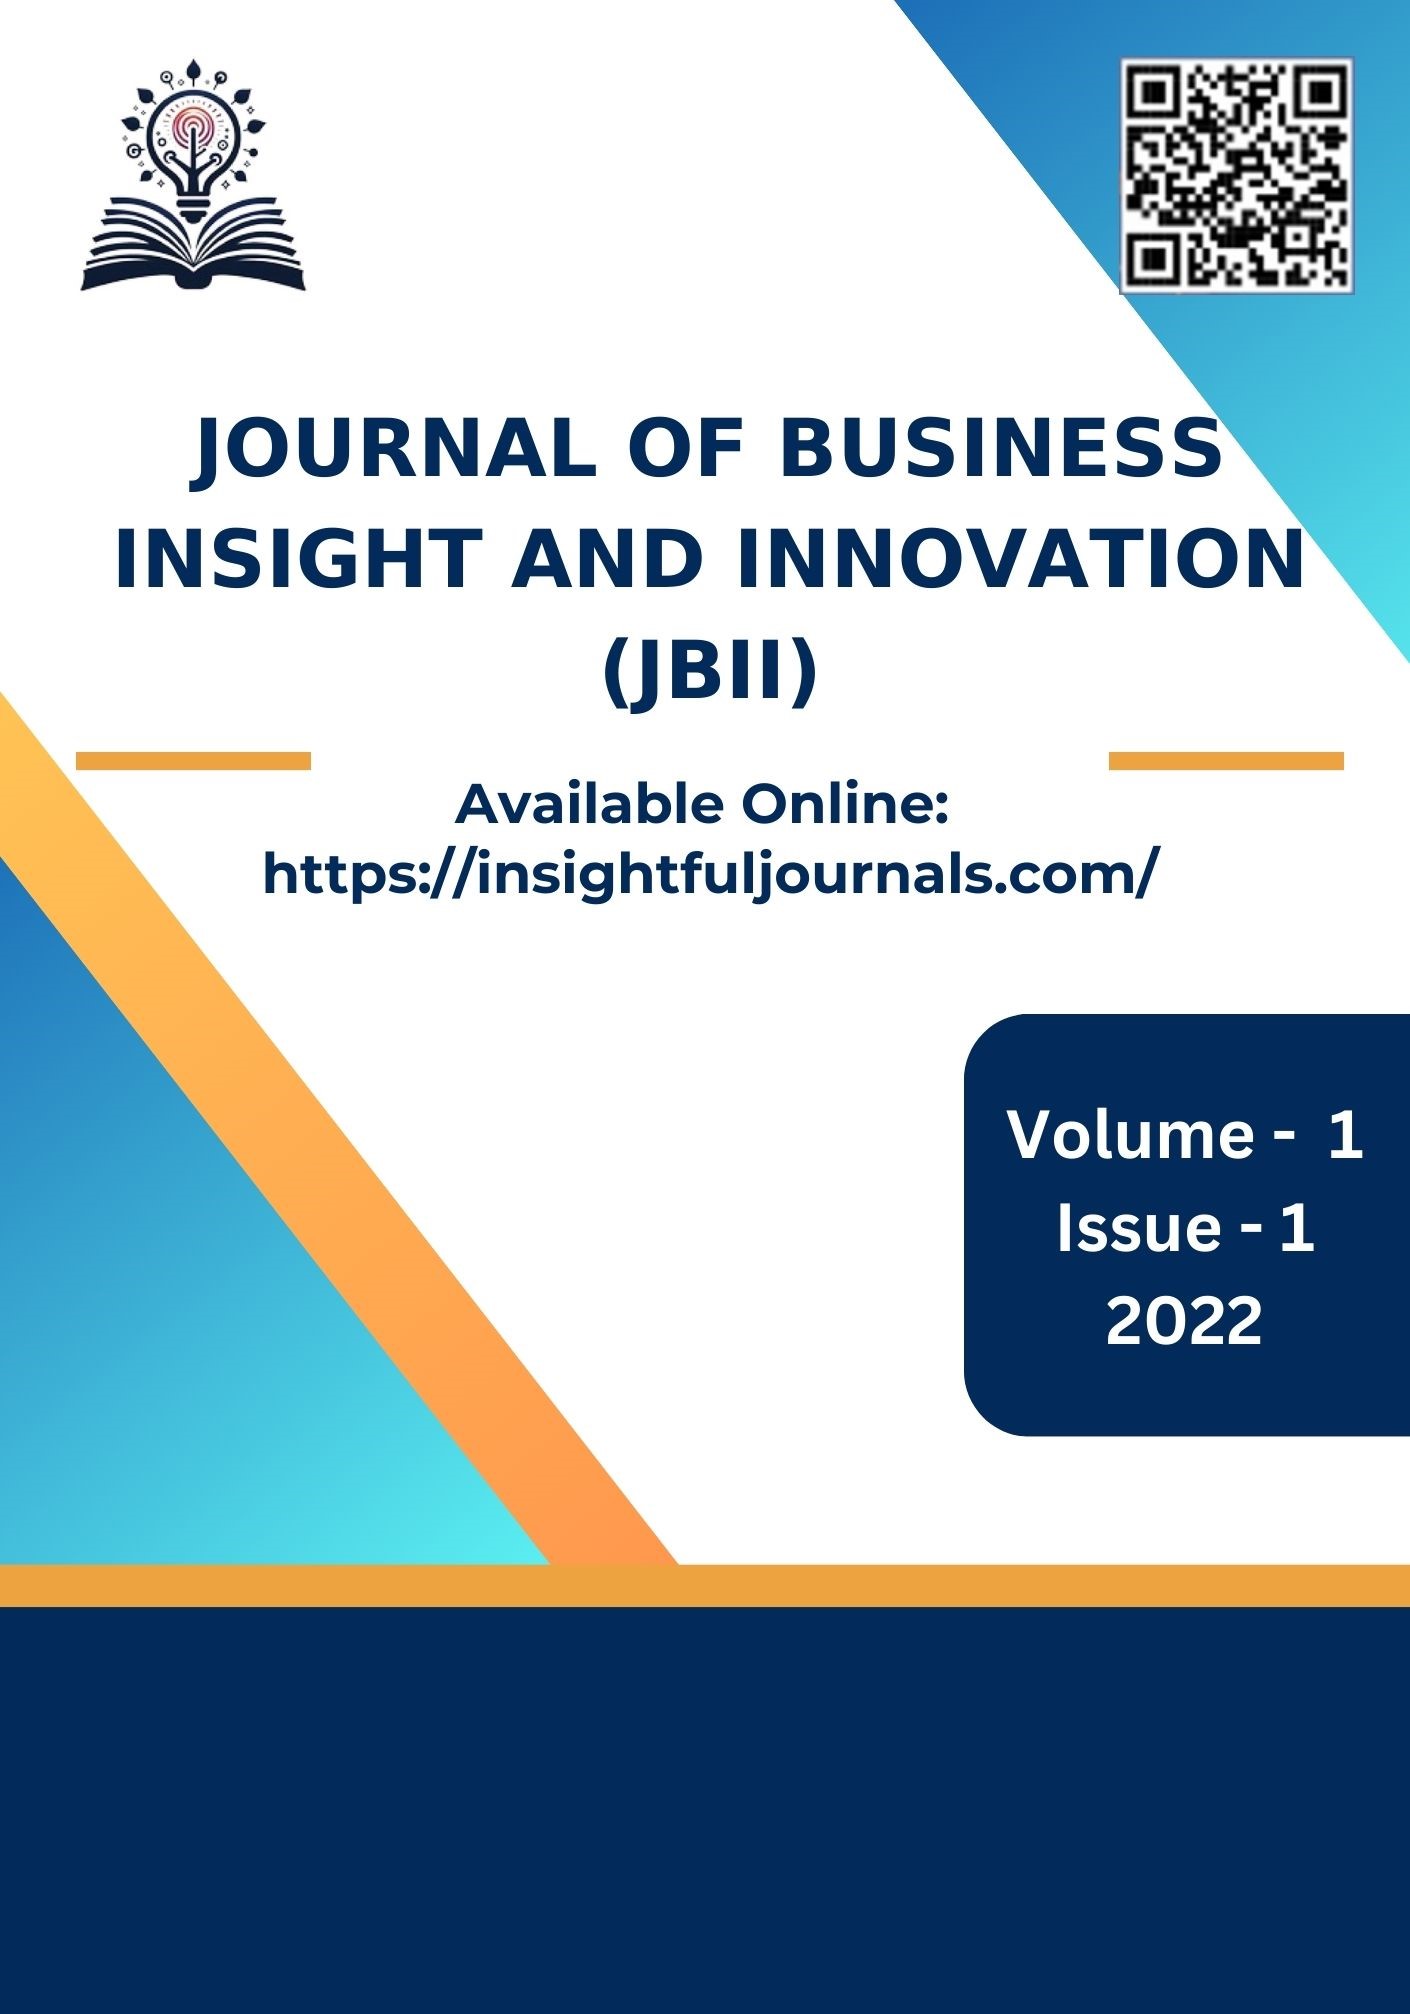 					View Vol. 1 No. 1 (2022): Journal of Business Insight and Innovation
				